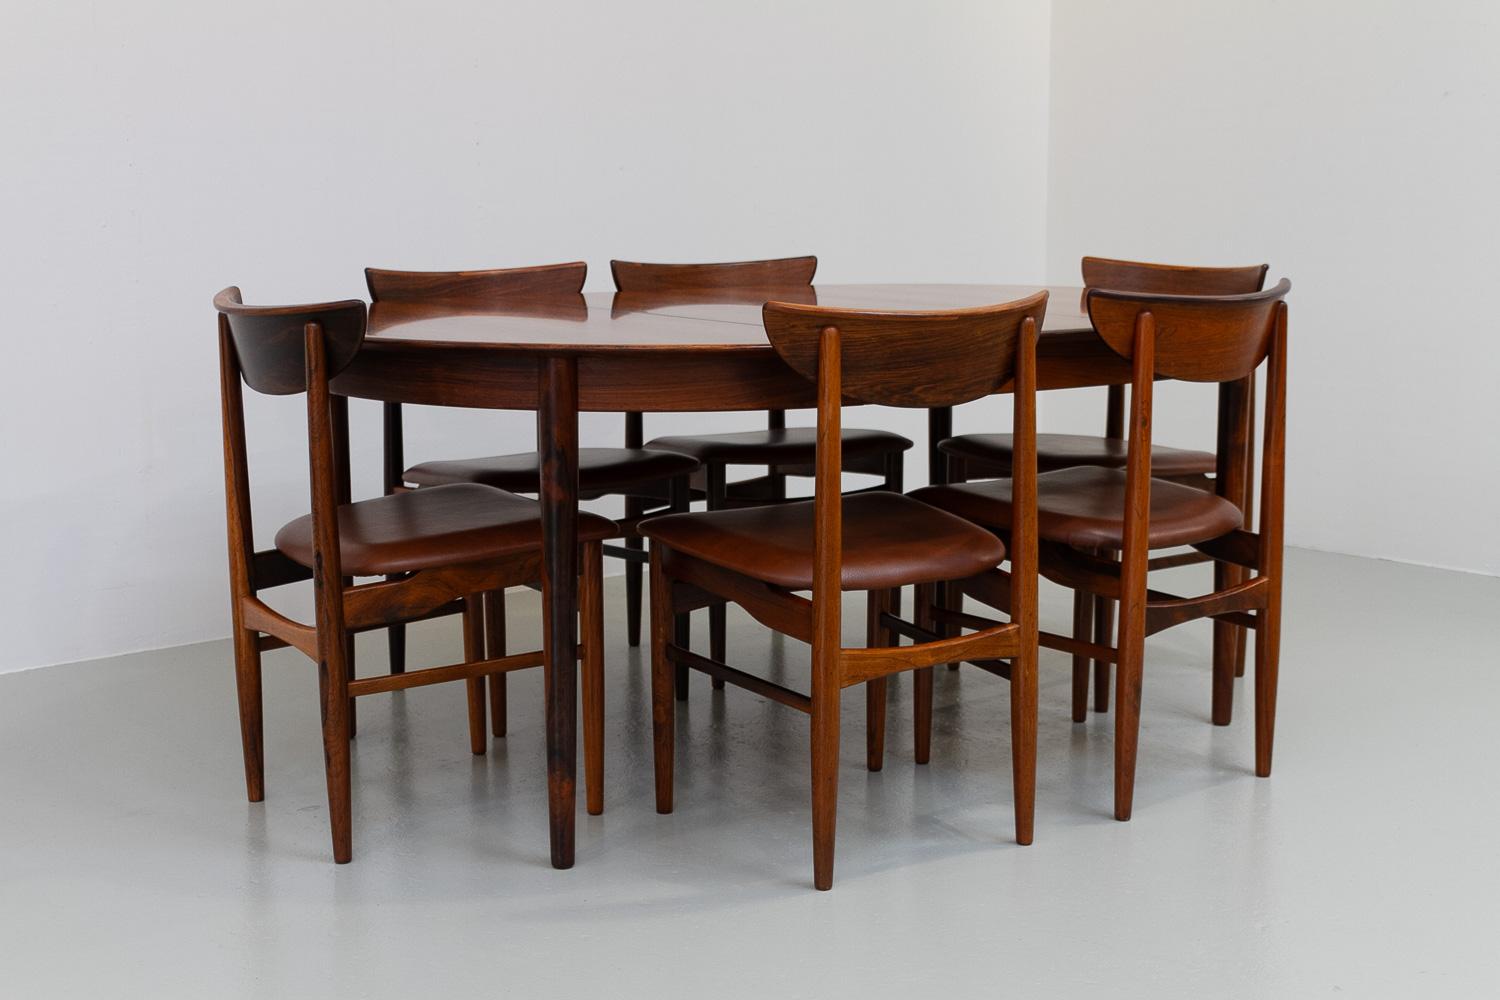 Danish Modern Rosewood Dining Room Set by Skovby, 1960s.
Great dining room set with extendable round dining table and six matching rosewood dining chairs. Designed by E. W. Bach and manufactured by Skovby Møbelfabrik Denmark in the 1960s.

The table